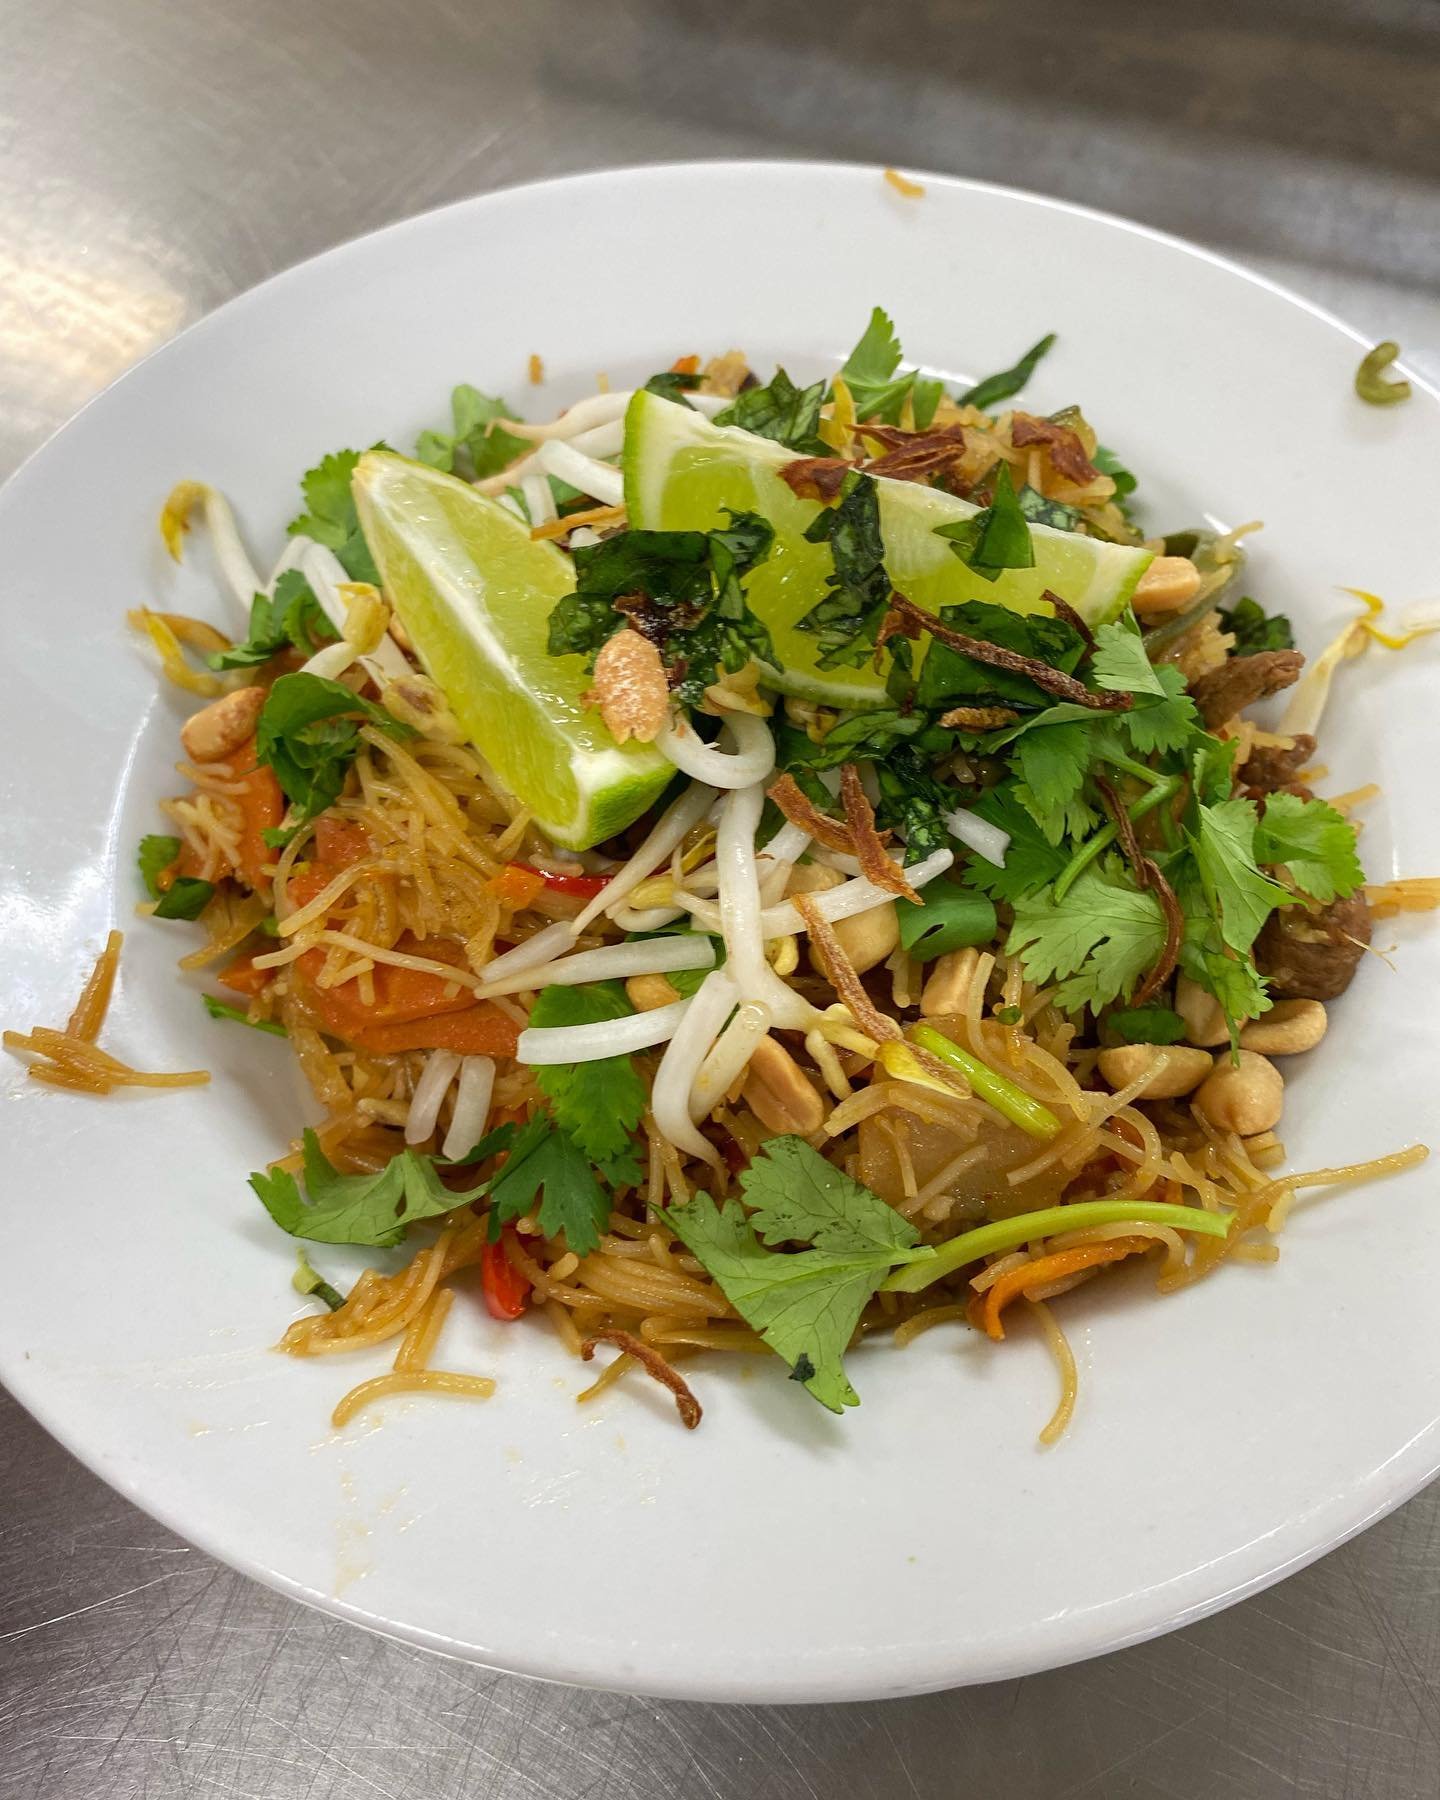 Warm Thai Beef Noodle Salad was on the lunch menu today. Another excellent dish prepared by our kitchen staff, it looks absolutely delicious! 😋 
.
.
.
.
.
.
#lunch #thaibeefsalad #noodlesalad #kitchen #cheflife #agricultureeducation #wacoa_denmark #